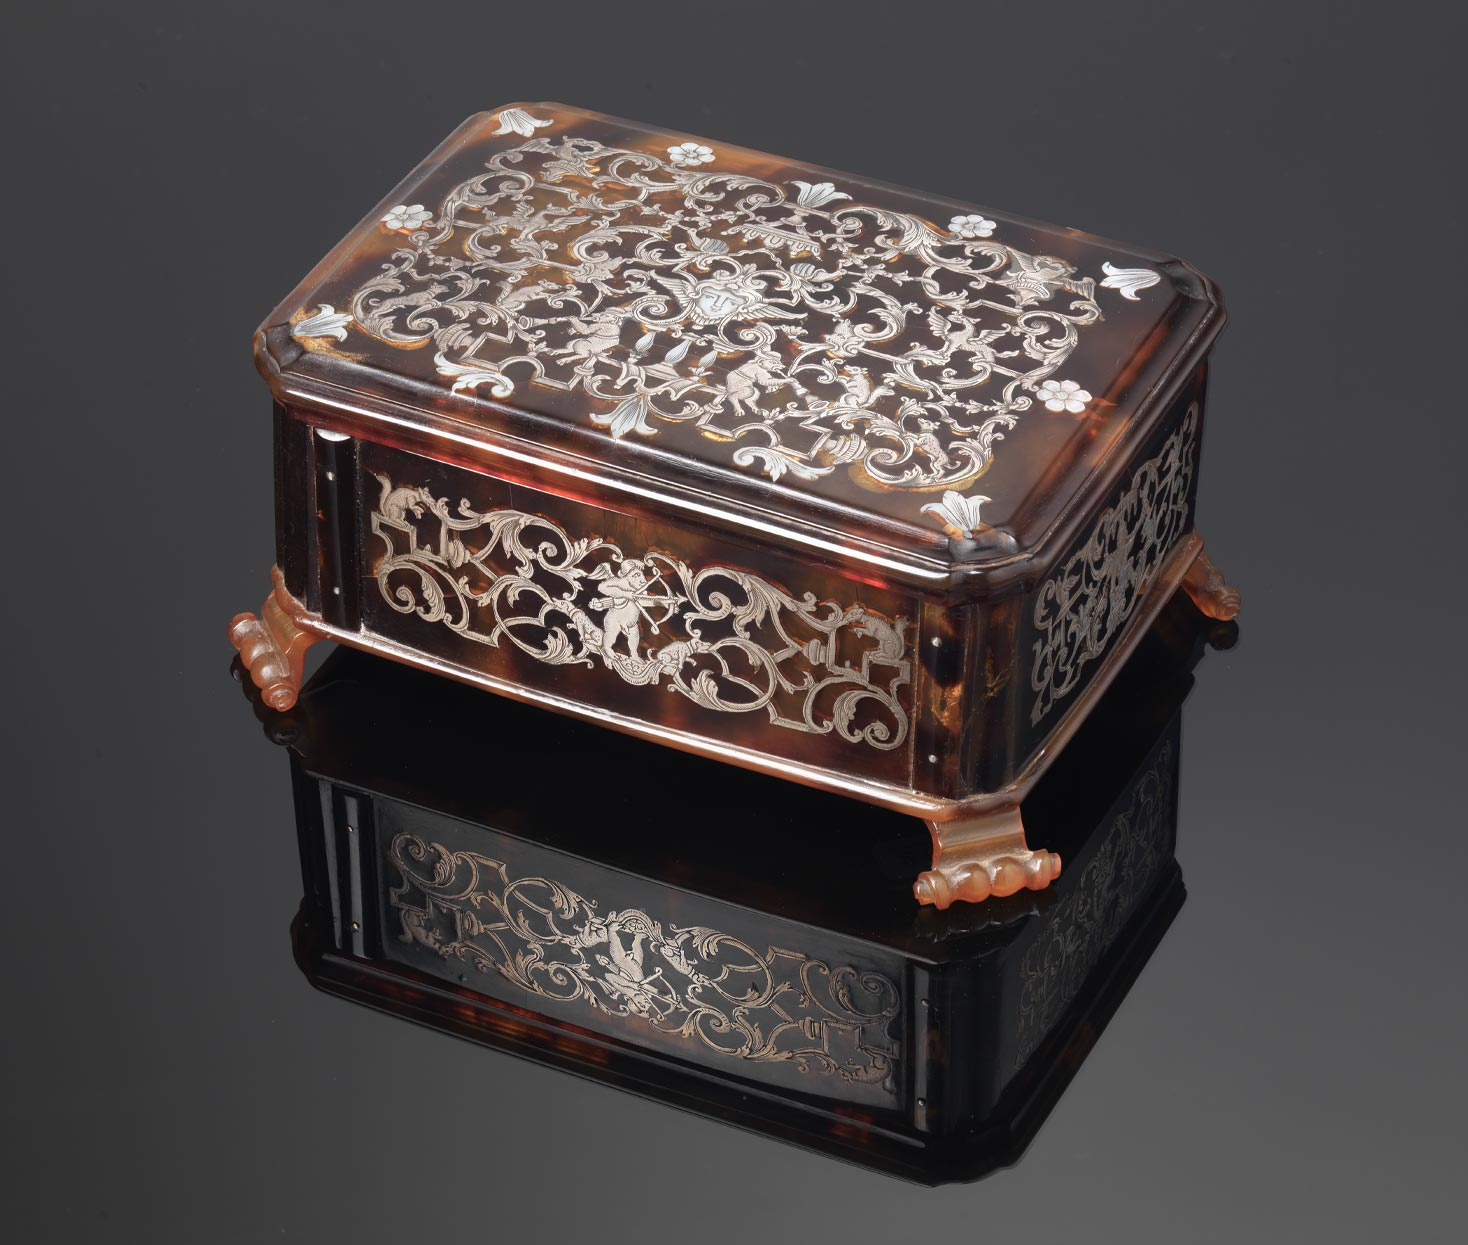 A rectangular tortoiseshell, silver piqué and mother of pearl box